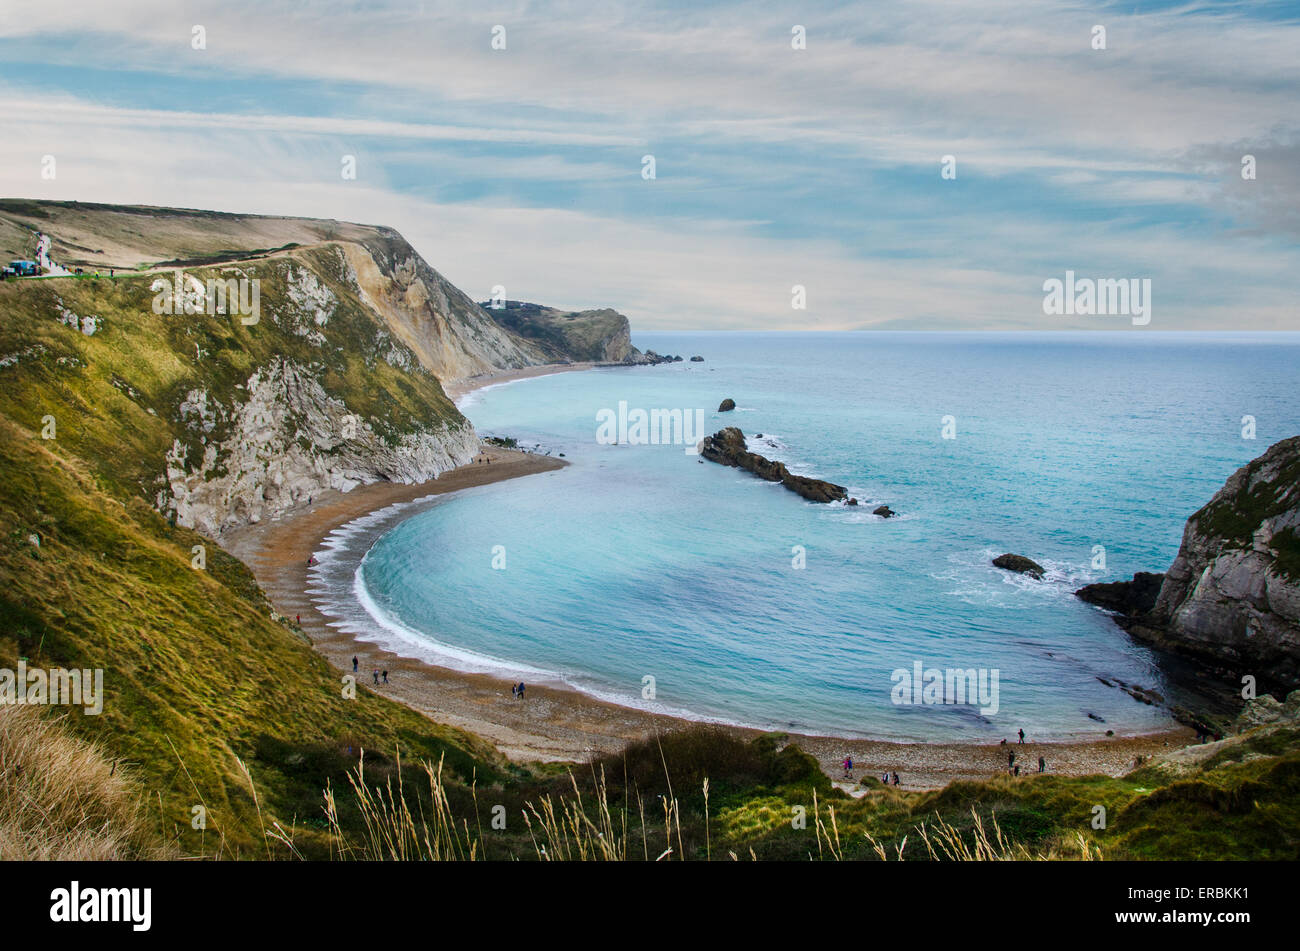 View of the Dorset Coast from near Durdle Door, looking East across St Oswald's Bay towards Lulworth. Stock Photo